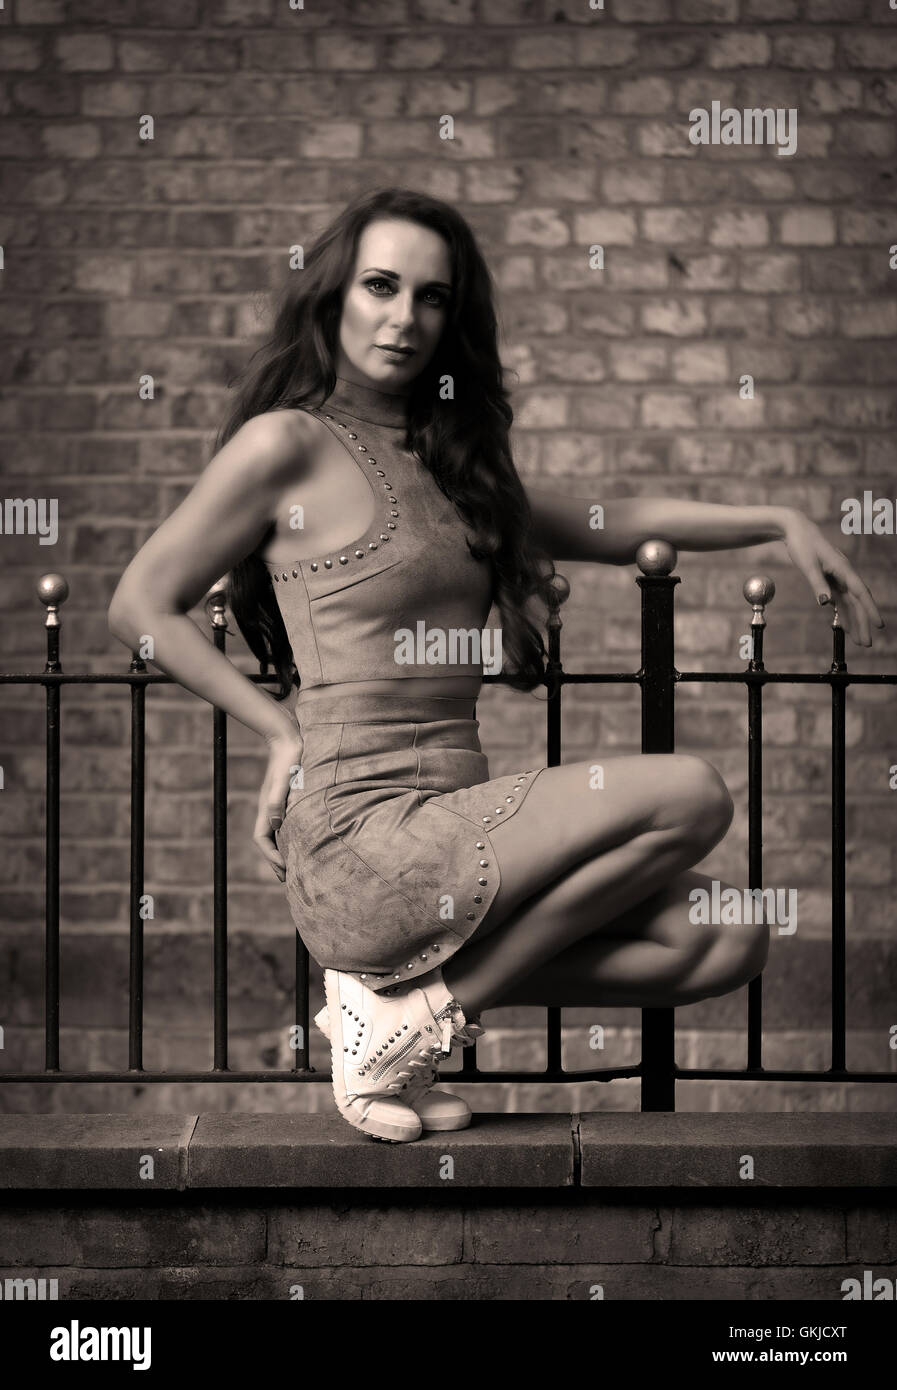 Athletic, muscular female fashion model stands in dance pose against brick wall wearing grey suede stud outfit, white trainers Stock Photo